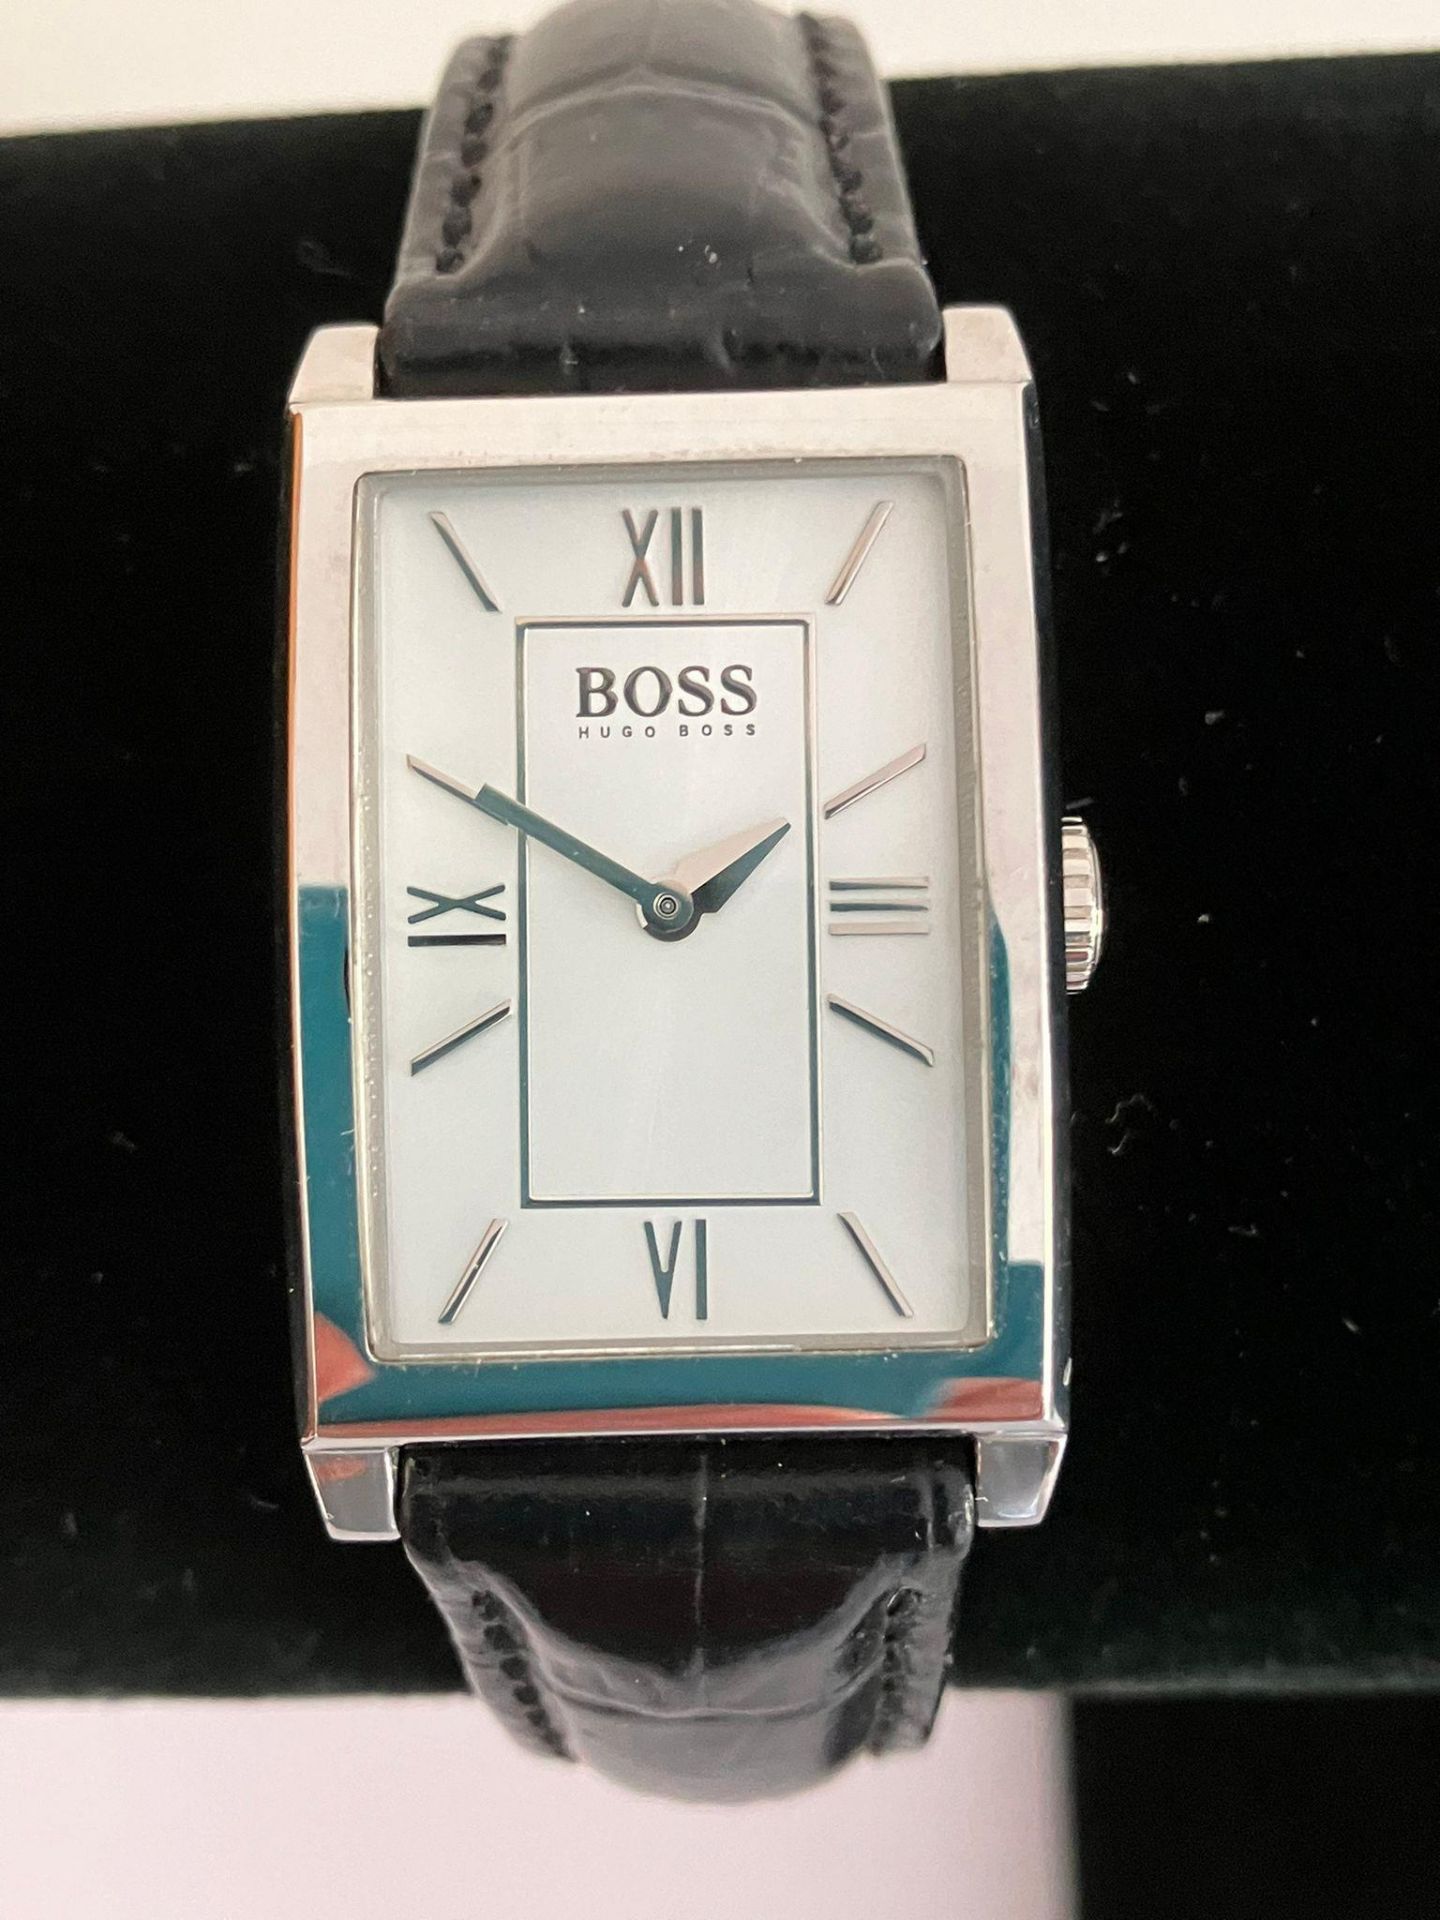 Genuine HUGO BOSS TANK WATCH. Model 73.3.14.2155. Mid size unisex wristwatch finished in stainless